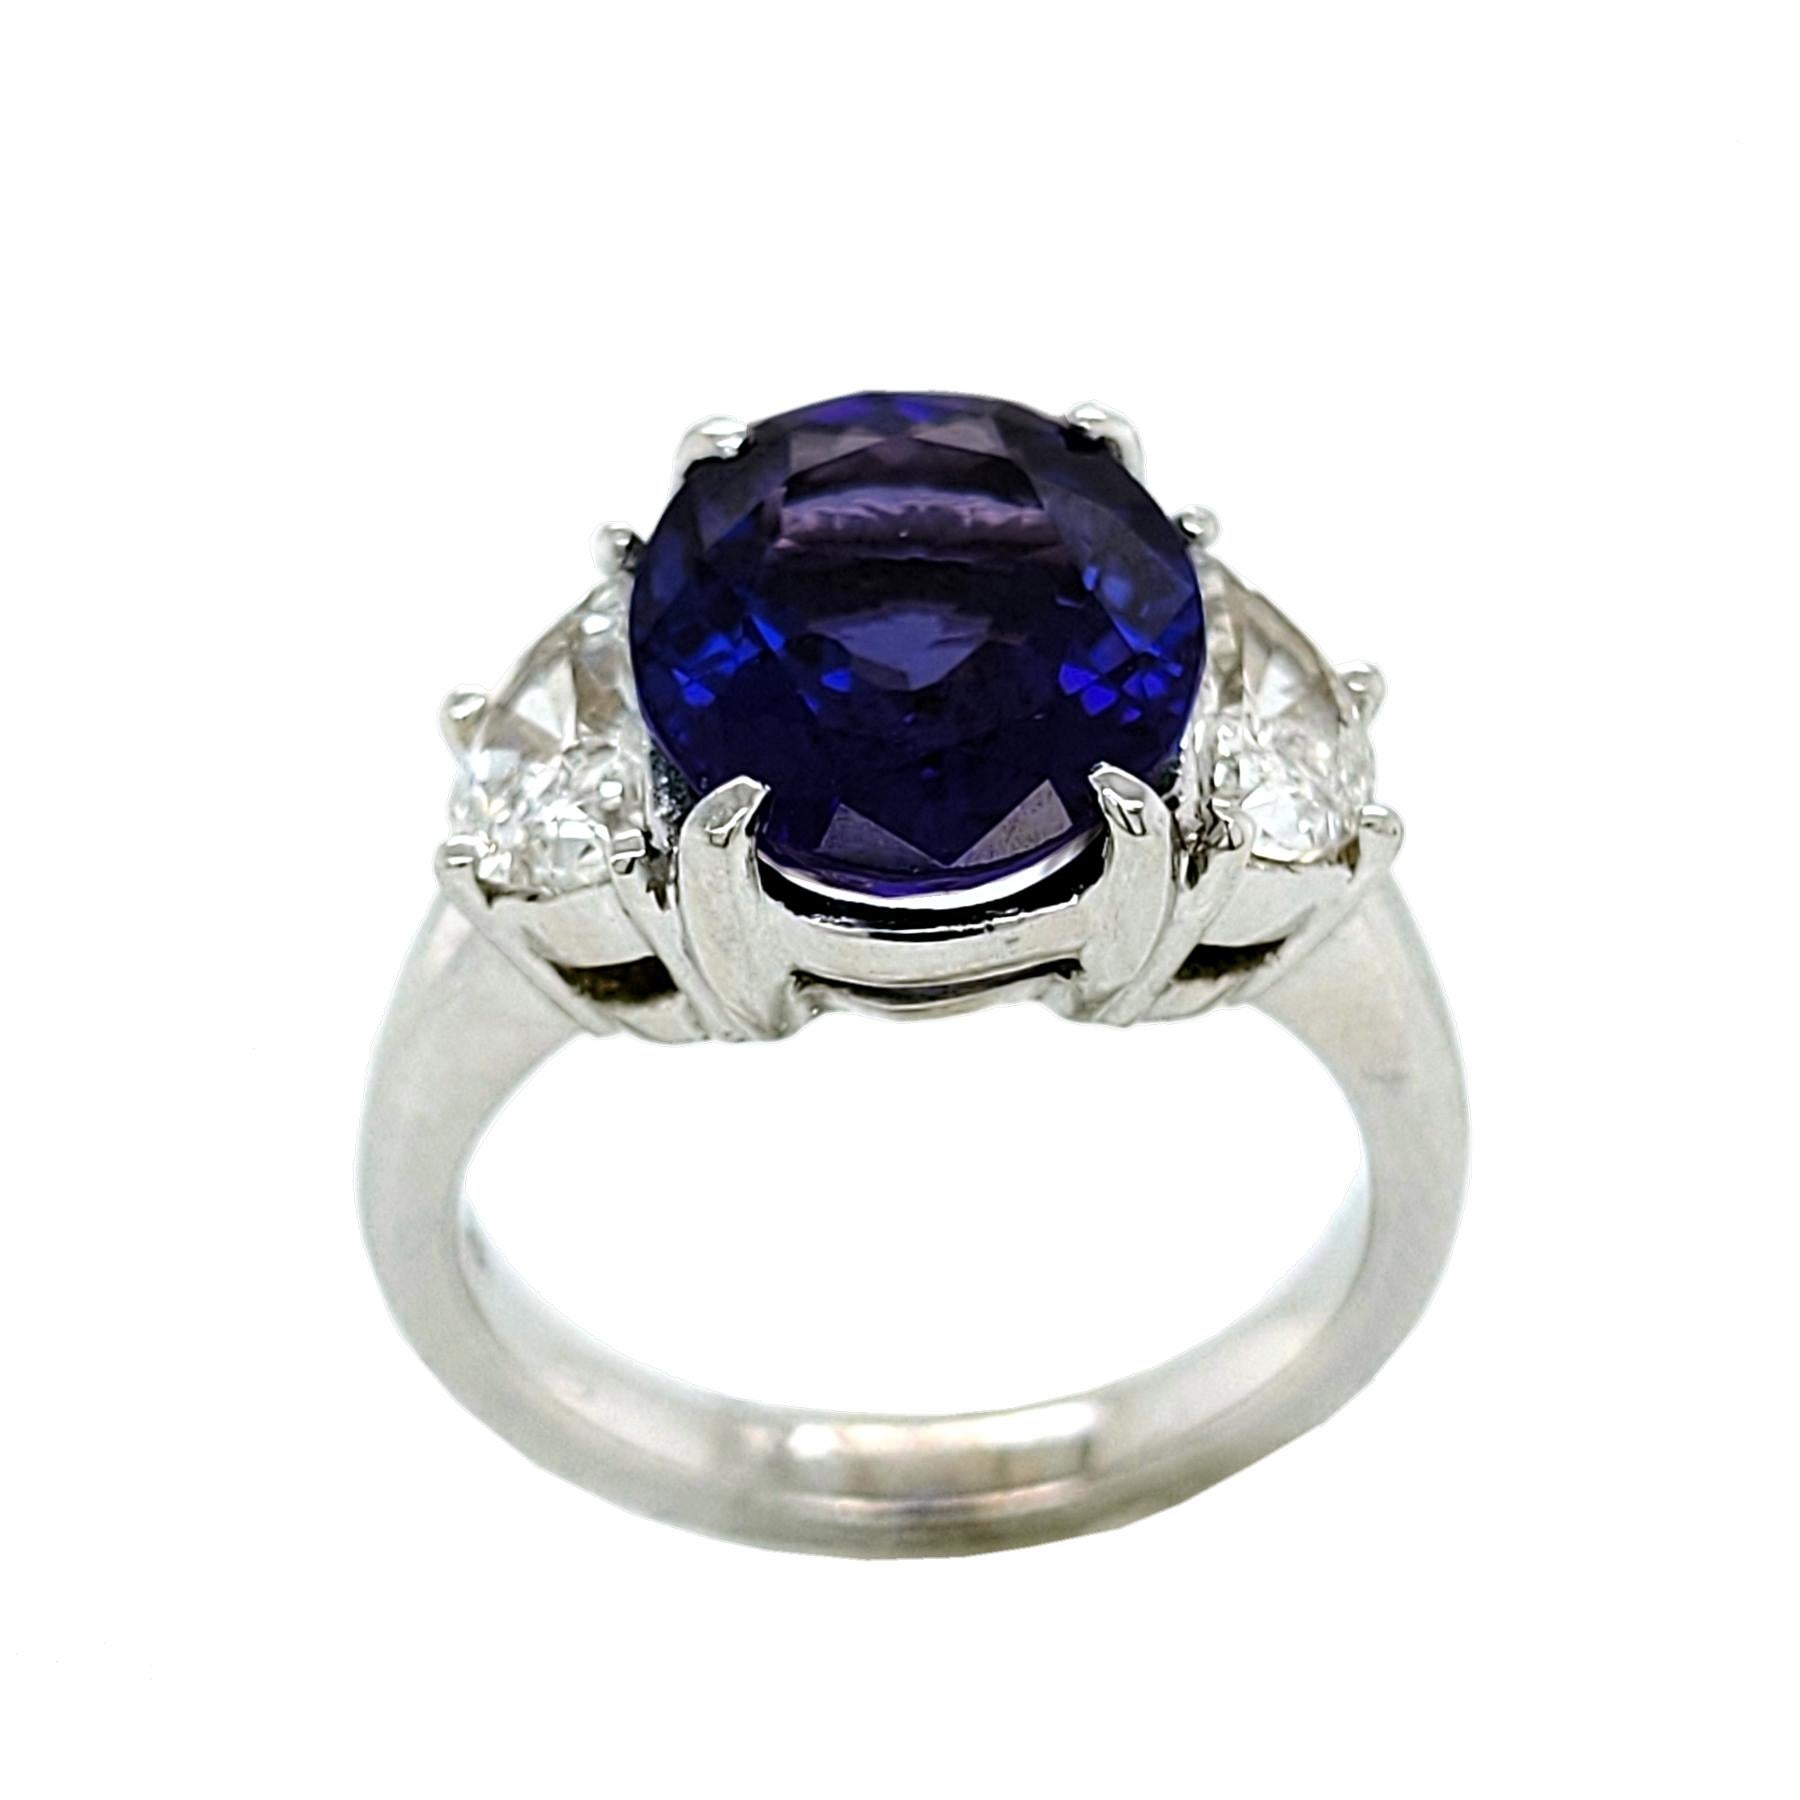 A beautiful color 4.47 Ct Oval shaped tanzanite set in the center of an 18K split 3 stone  with two Half Moon diamonds (TW; 0.93 Ct) engagement ring. 

Details:
Center Stone: 4.47 carat Oval Shape tanzanite
Side Stone Diamonds: 2 Half Moon diamonds